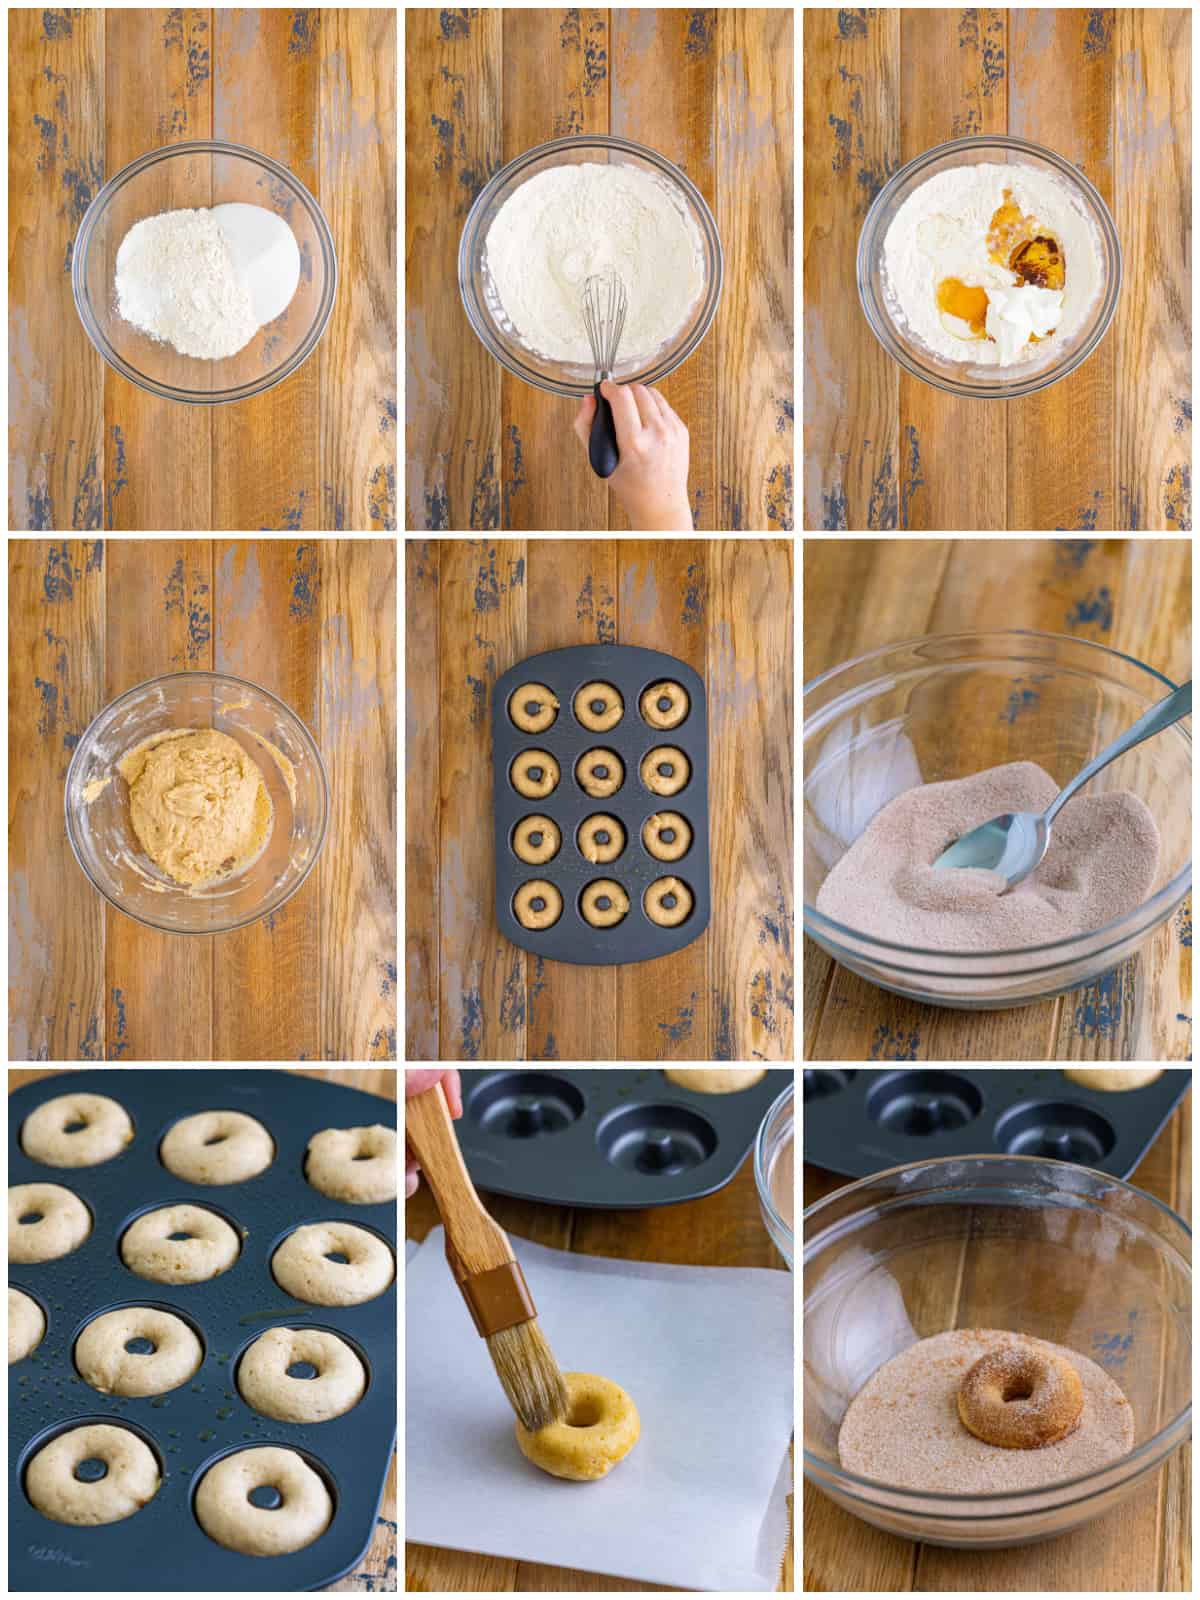 Step by step photos on how to make Cinnamon Sugar Mini Donuts.